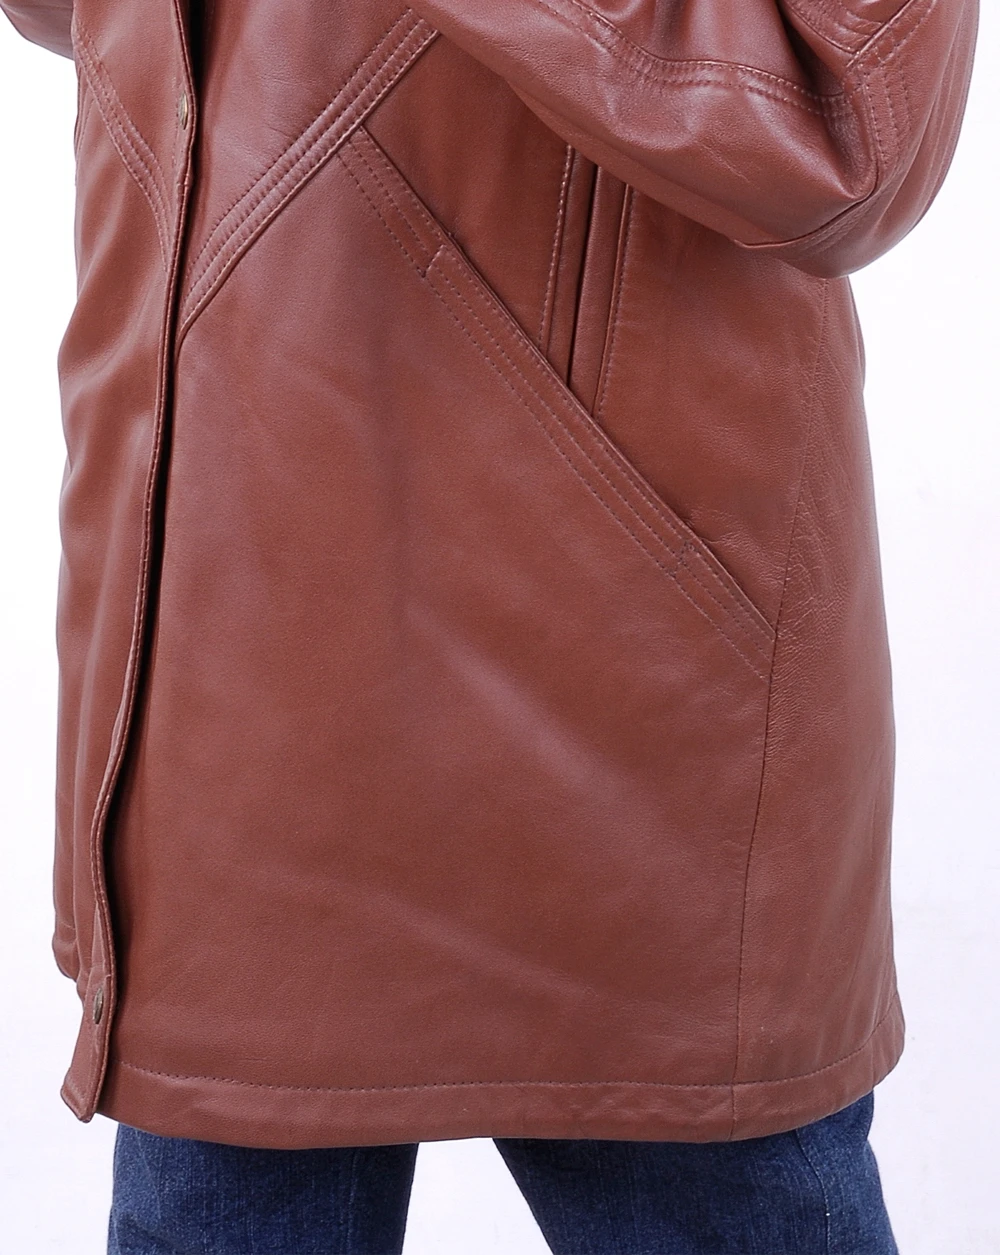 Lambskin Leather Coat with Faux Fur Trim